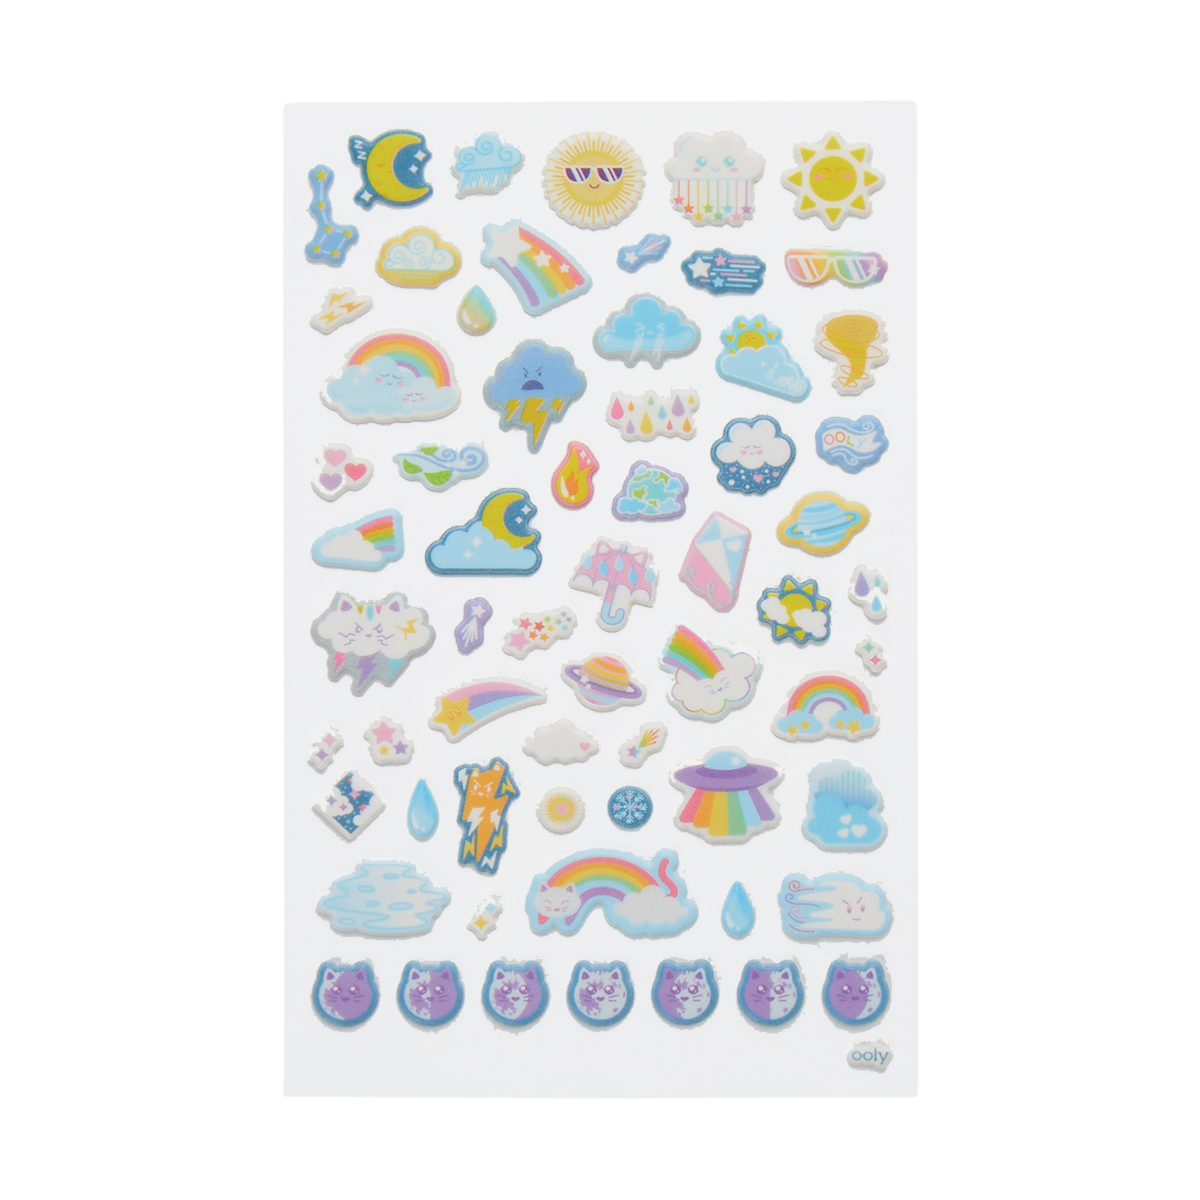 Stickiville Weather Pals sticker sheet out of packaging